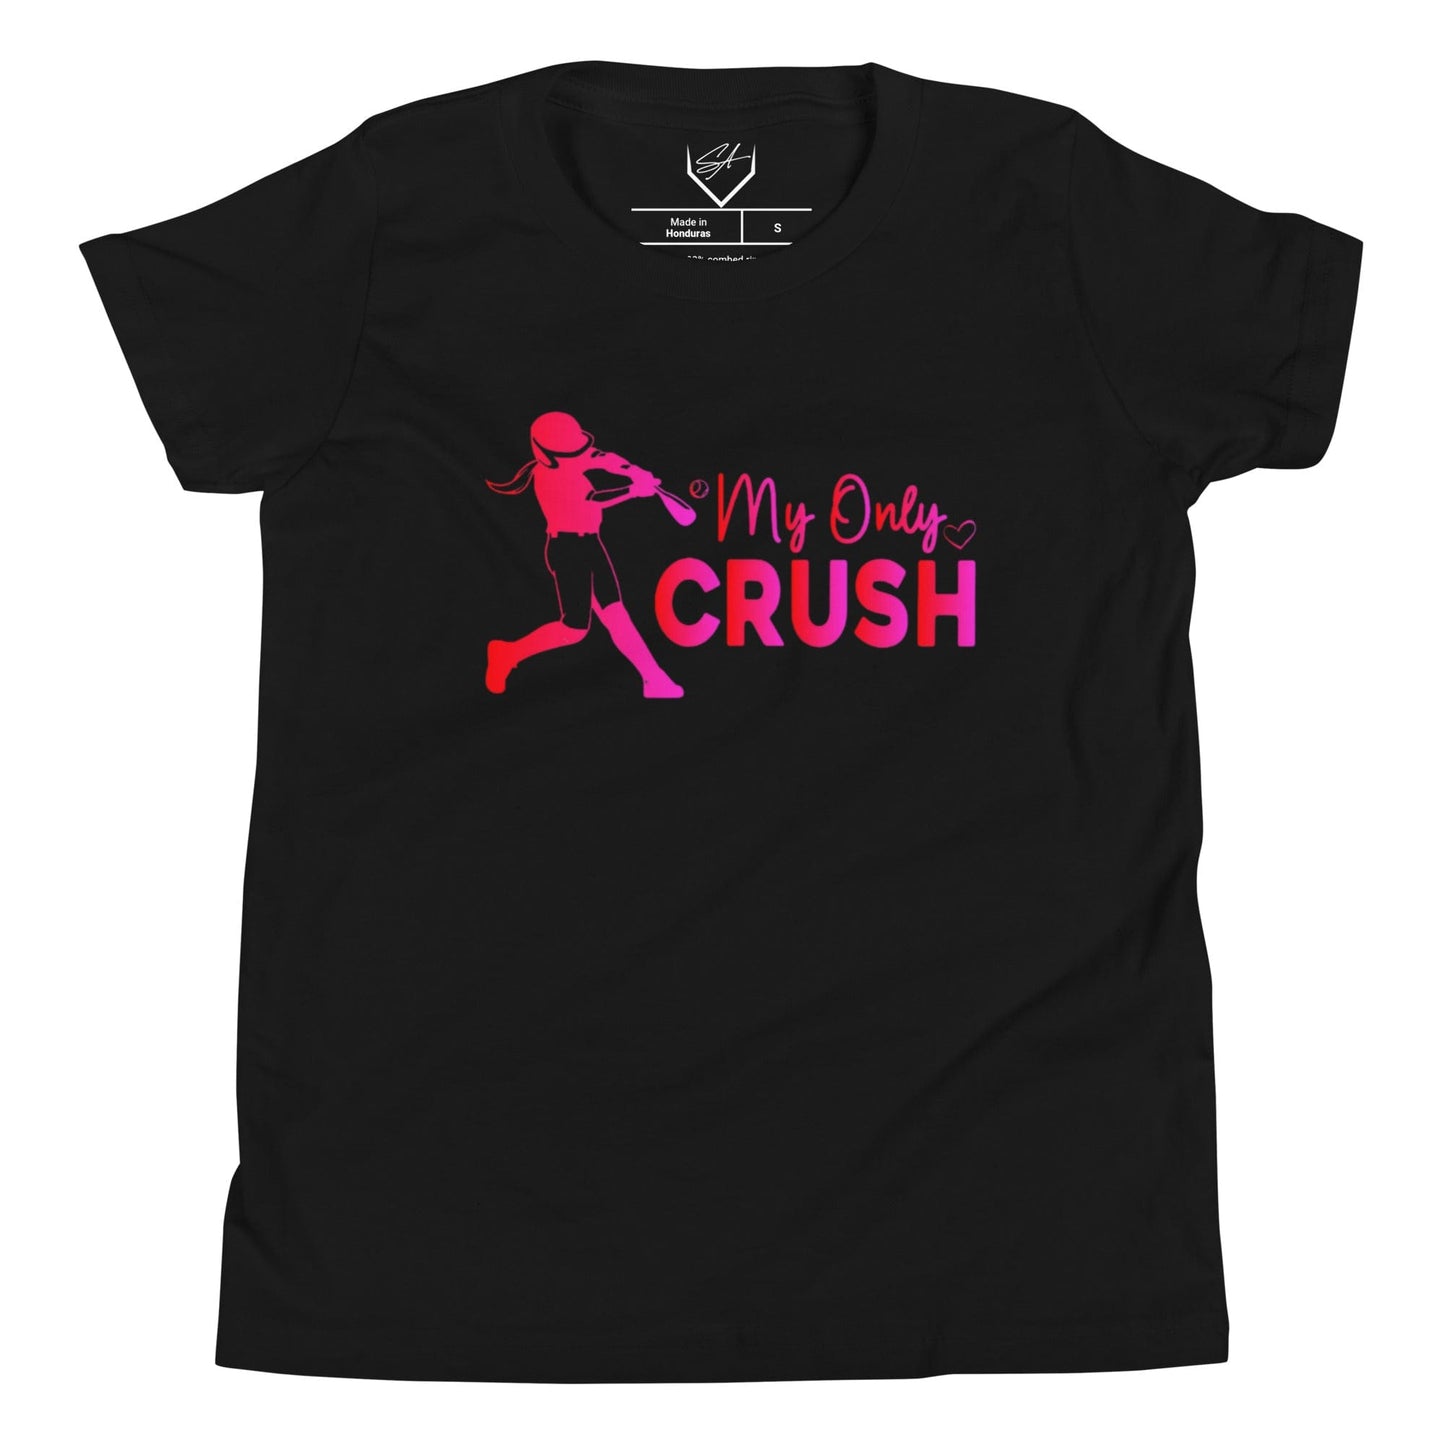 My Only Crush - Youth Tee